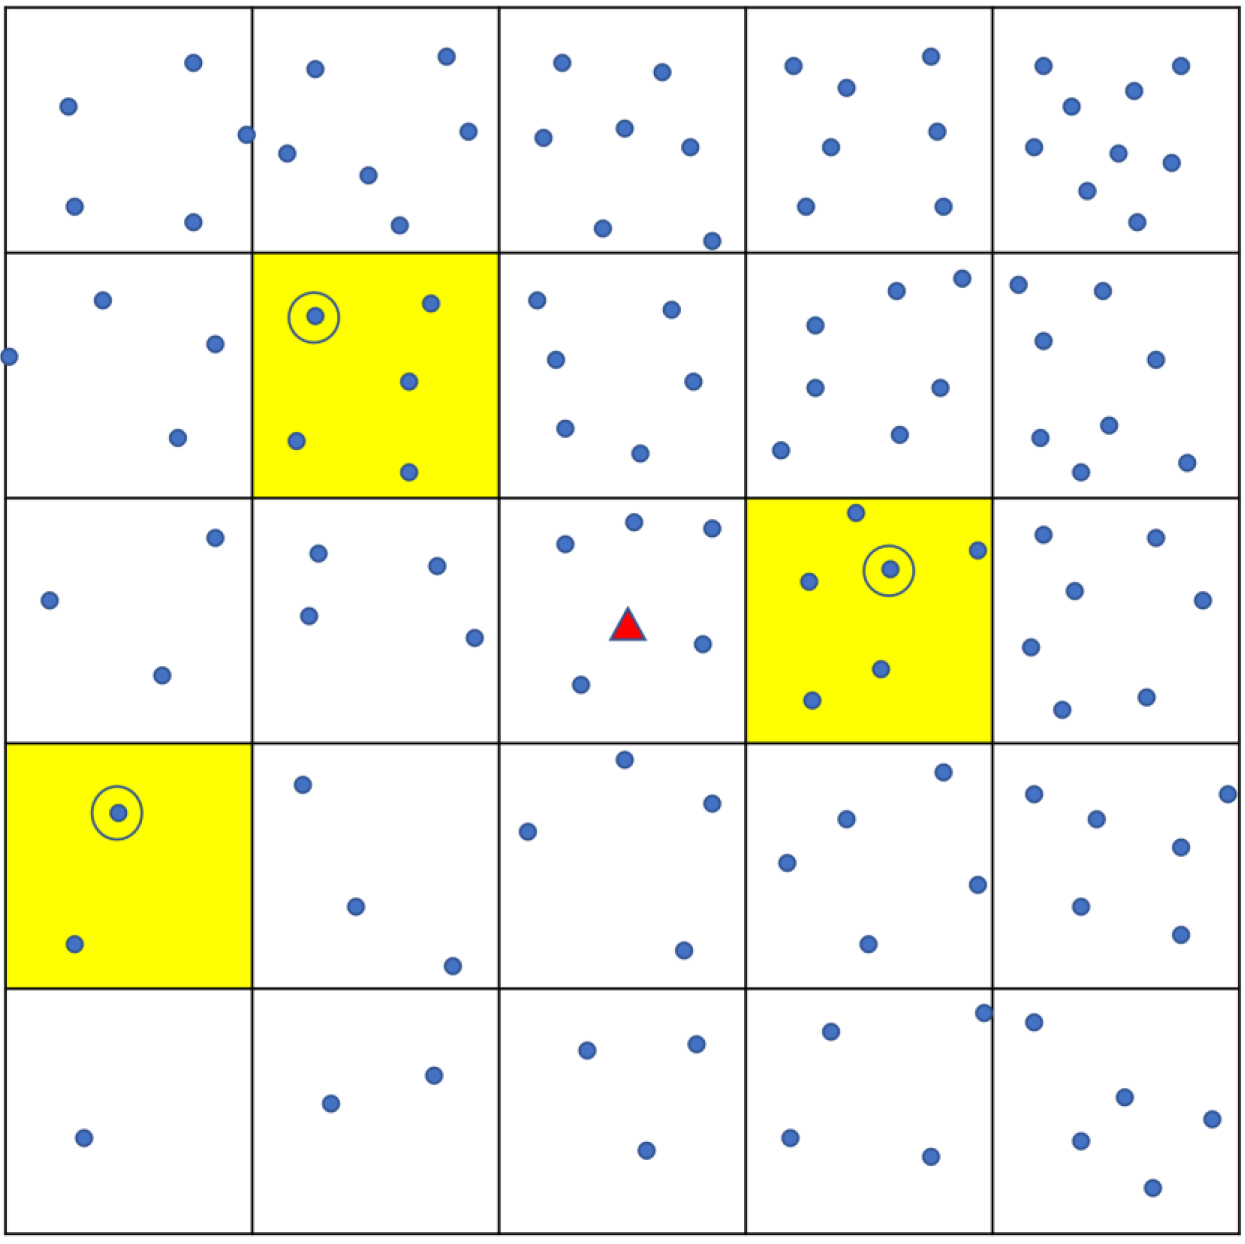 Sampling using ‘Square’ method. Each dot shows a household. The town is divided into a grid of smaller squares. Yellow shading shows the three that are randomly chosen, and one household (circled) is randomly chosen from each.